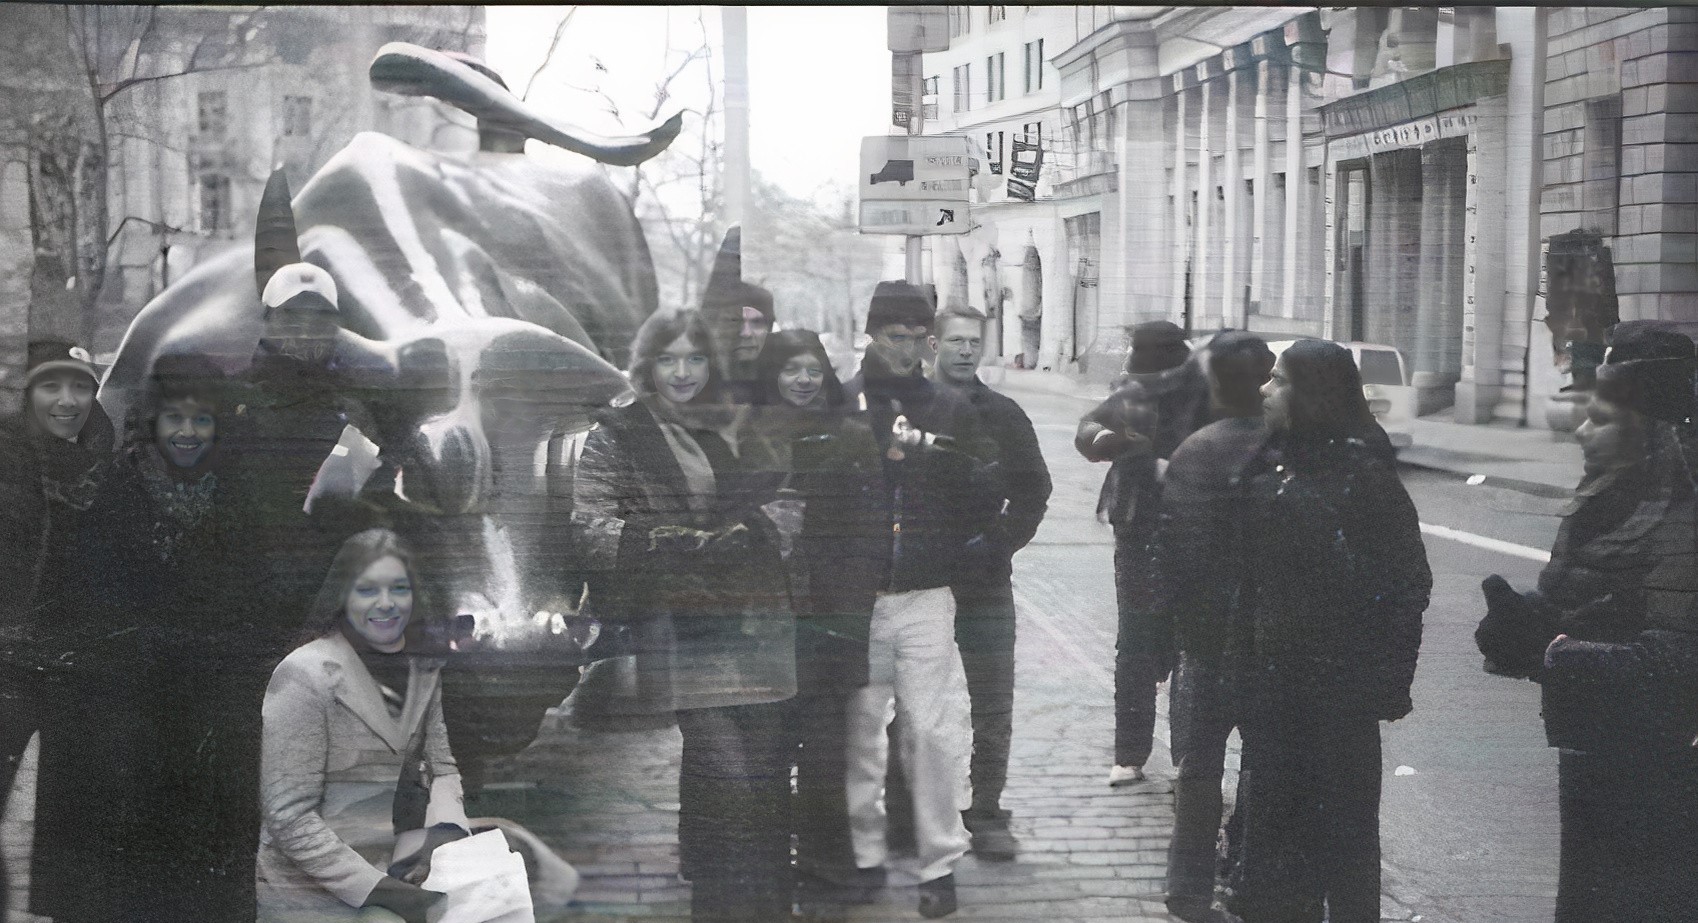 Black and white photo of group of people standing by statue of a bull.